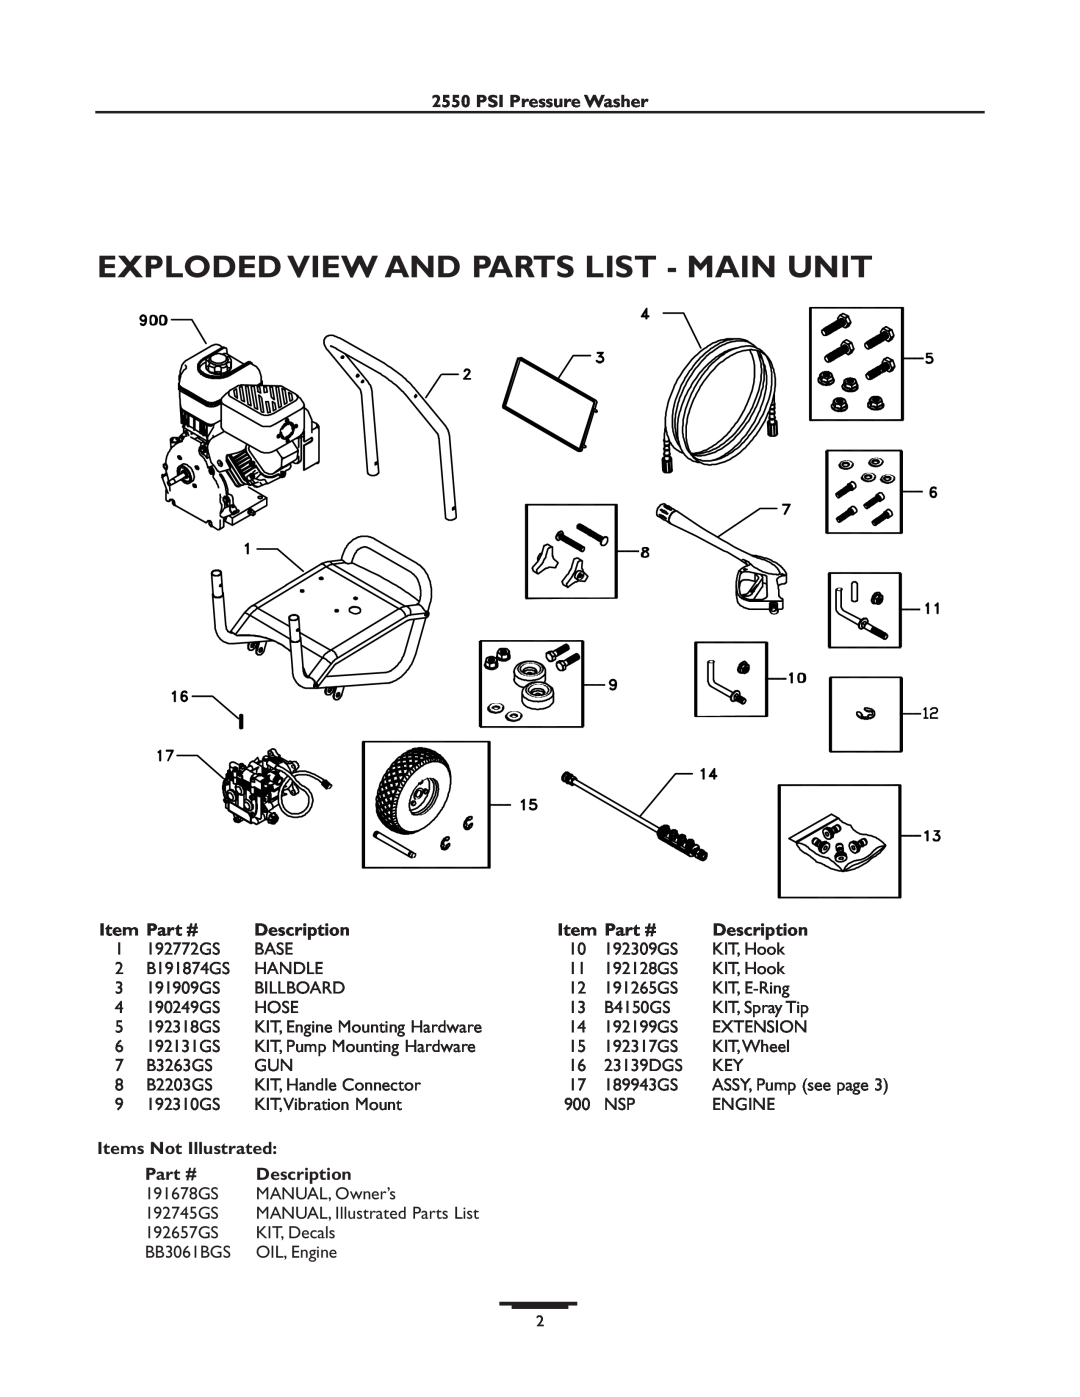 Briggs & Stratton 01936 Exploded View And Parts List - Main Unit, PSI Pressure Washer, Description, Items Not Illustrated 